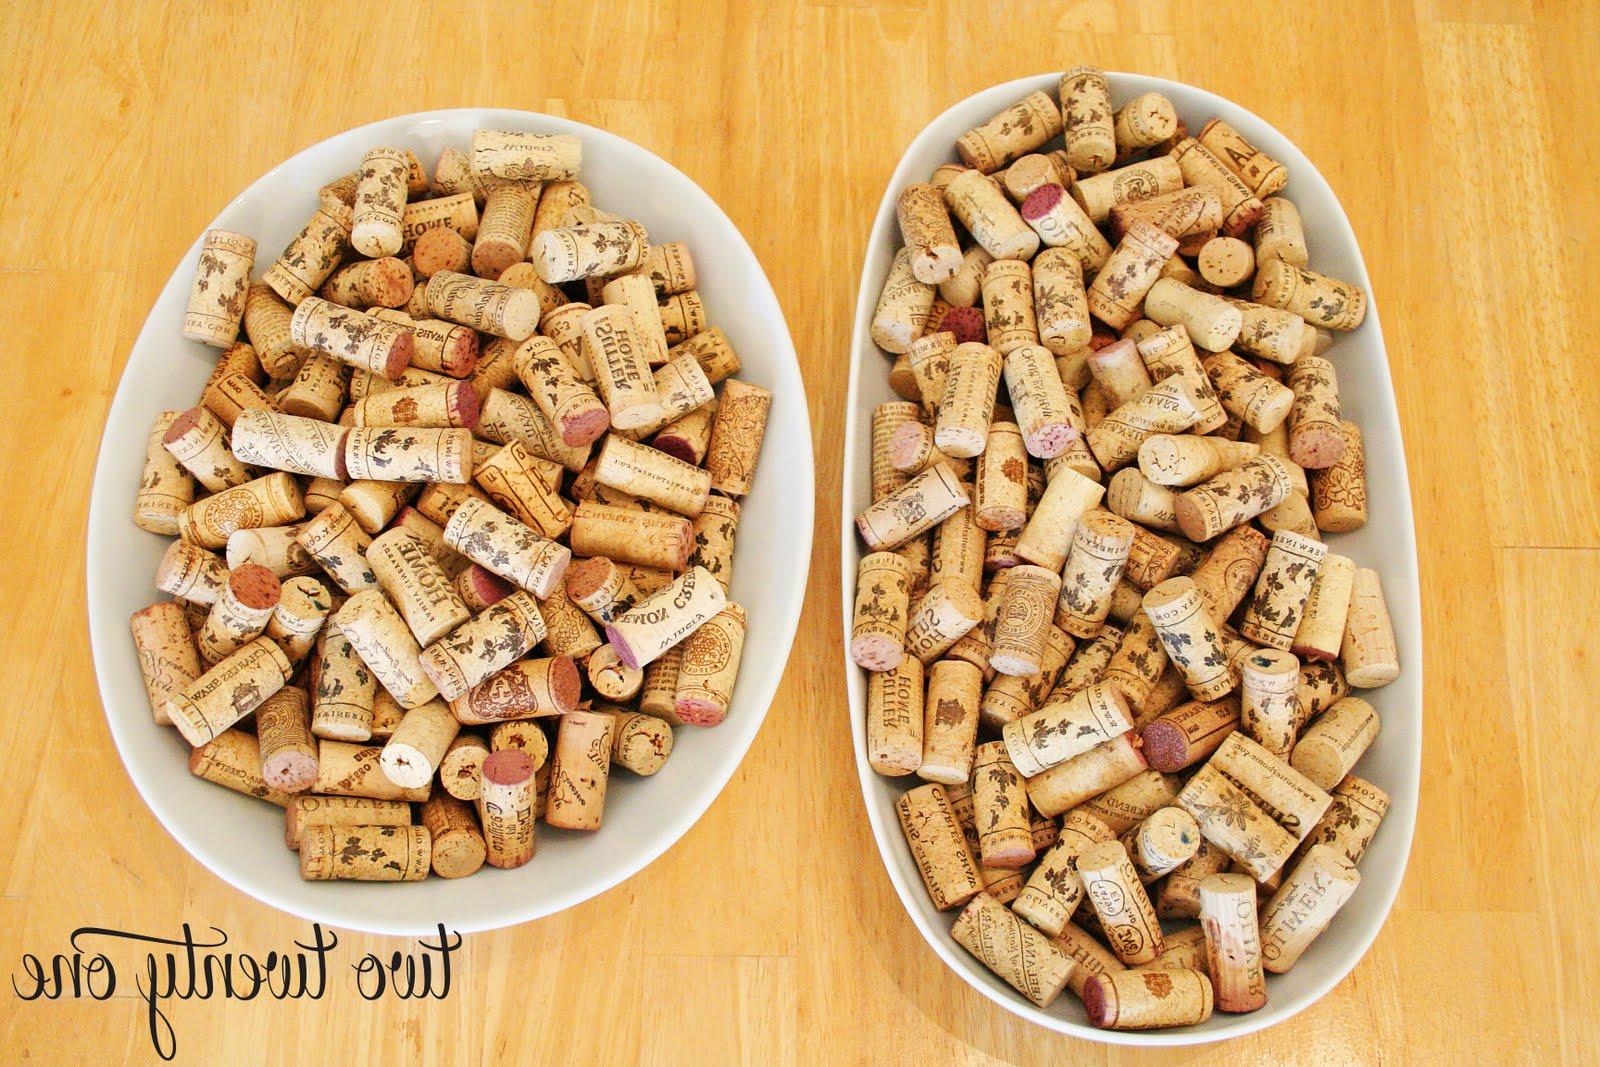 or winery to save corks